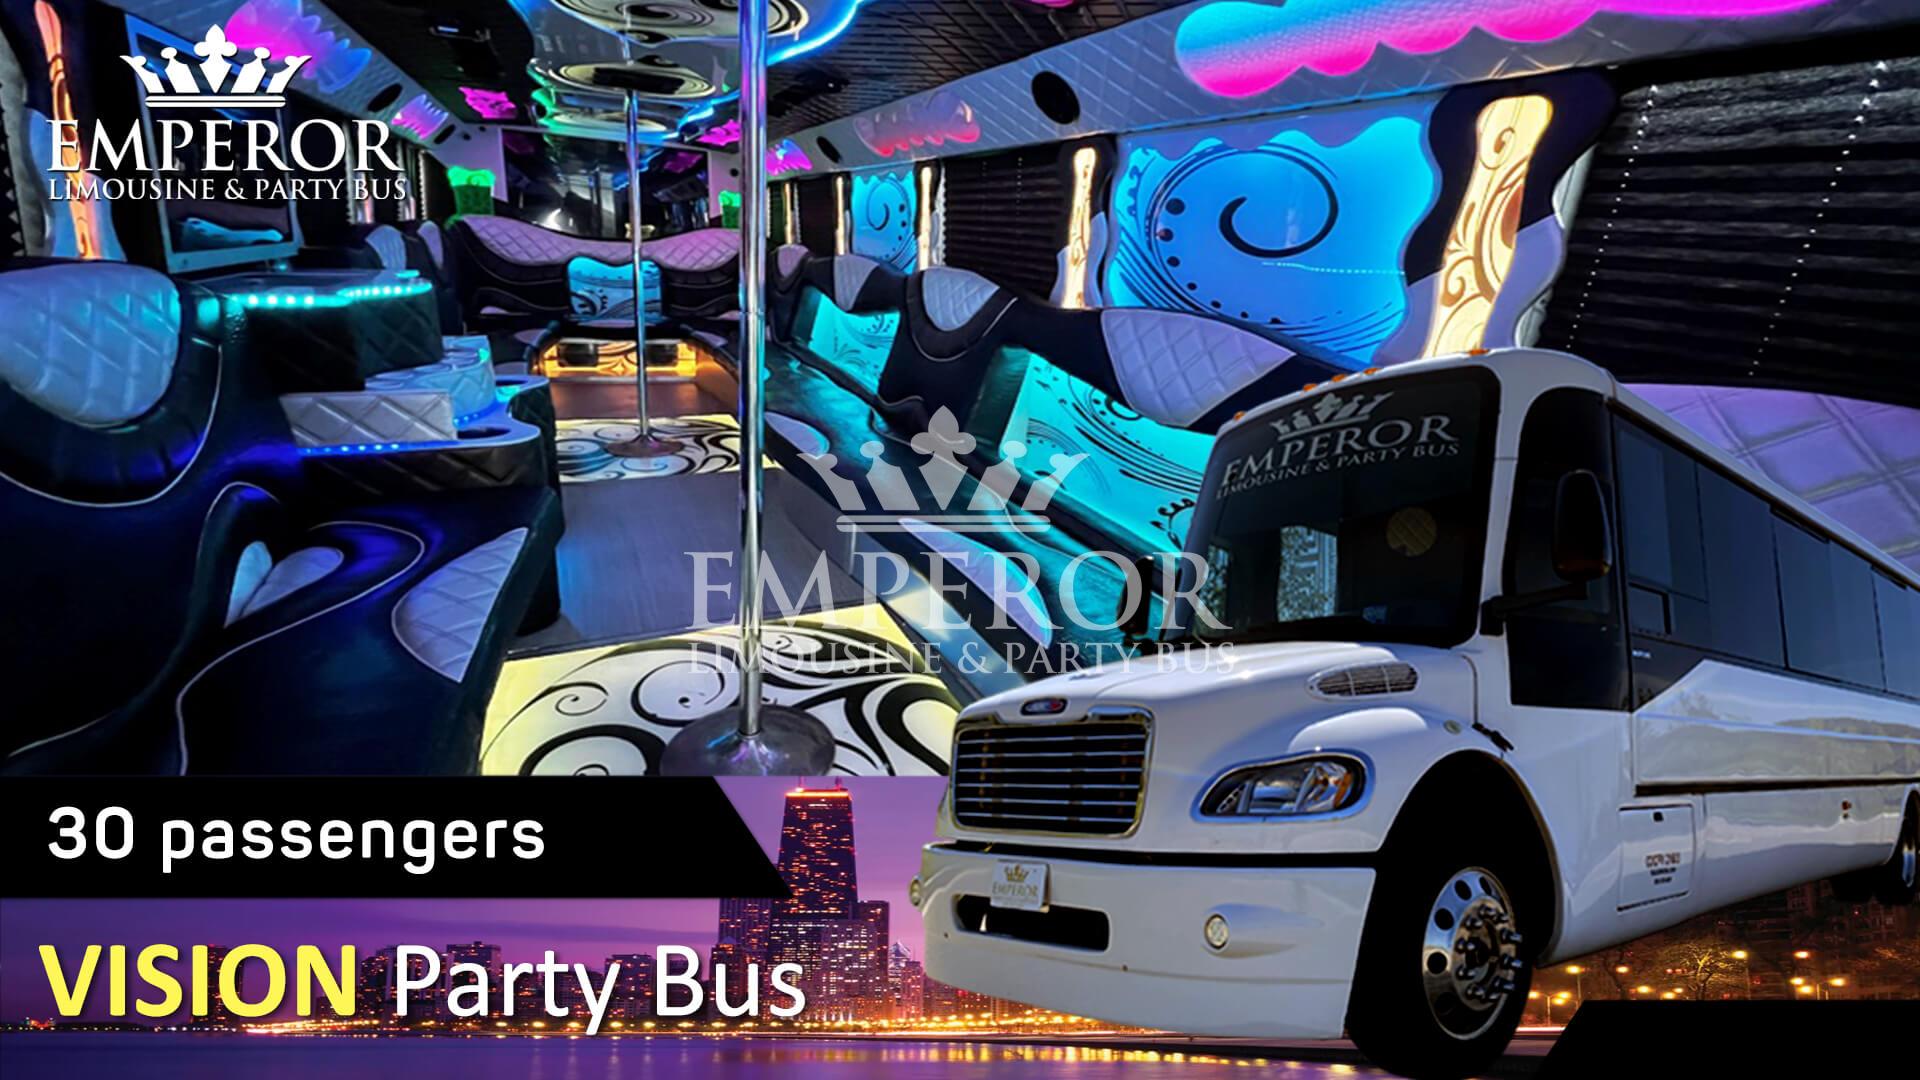 Bachelor party bus for rent - Vision Edition